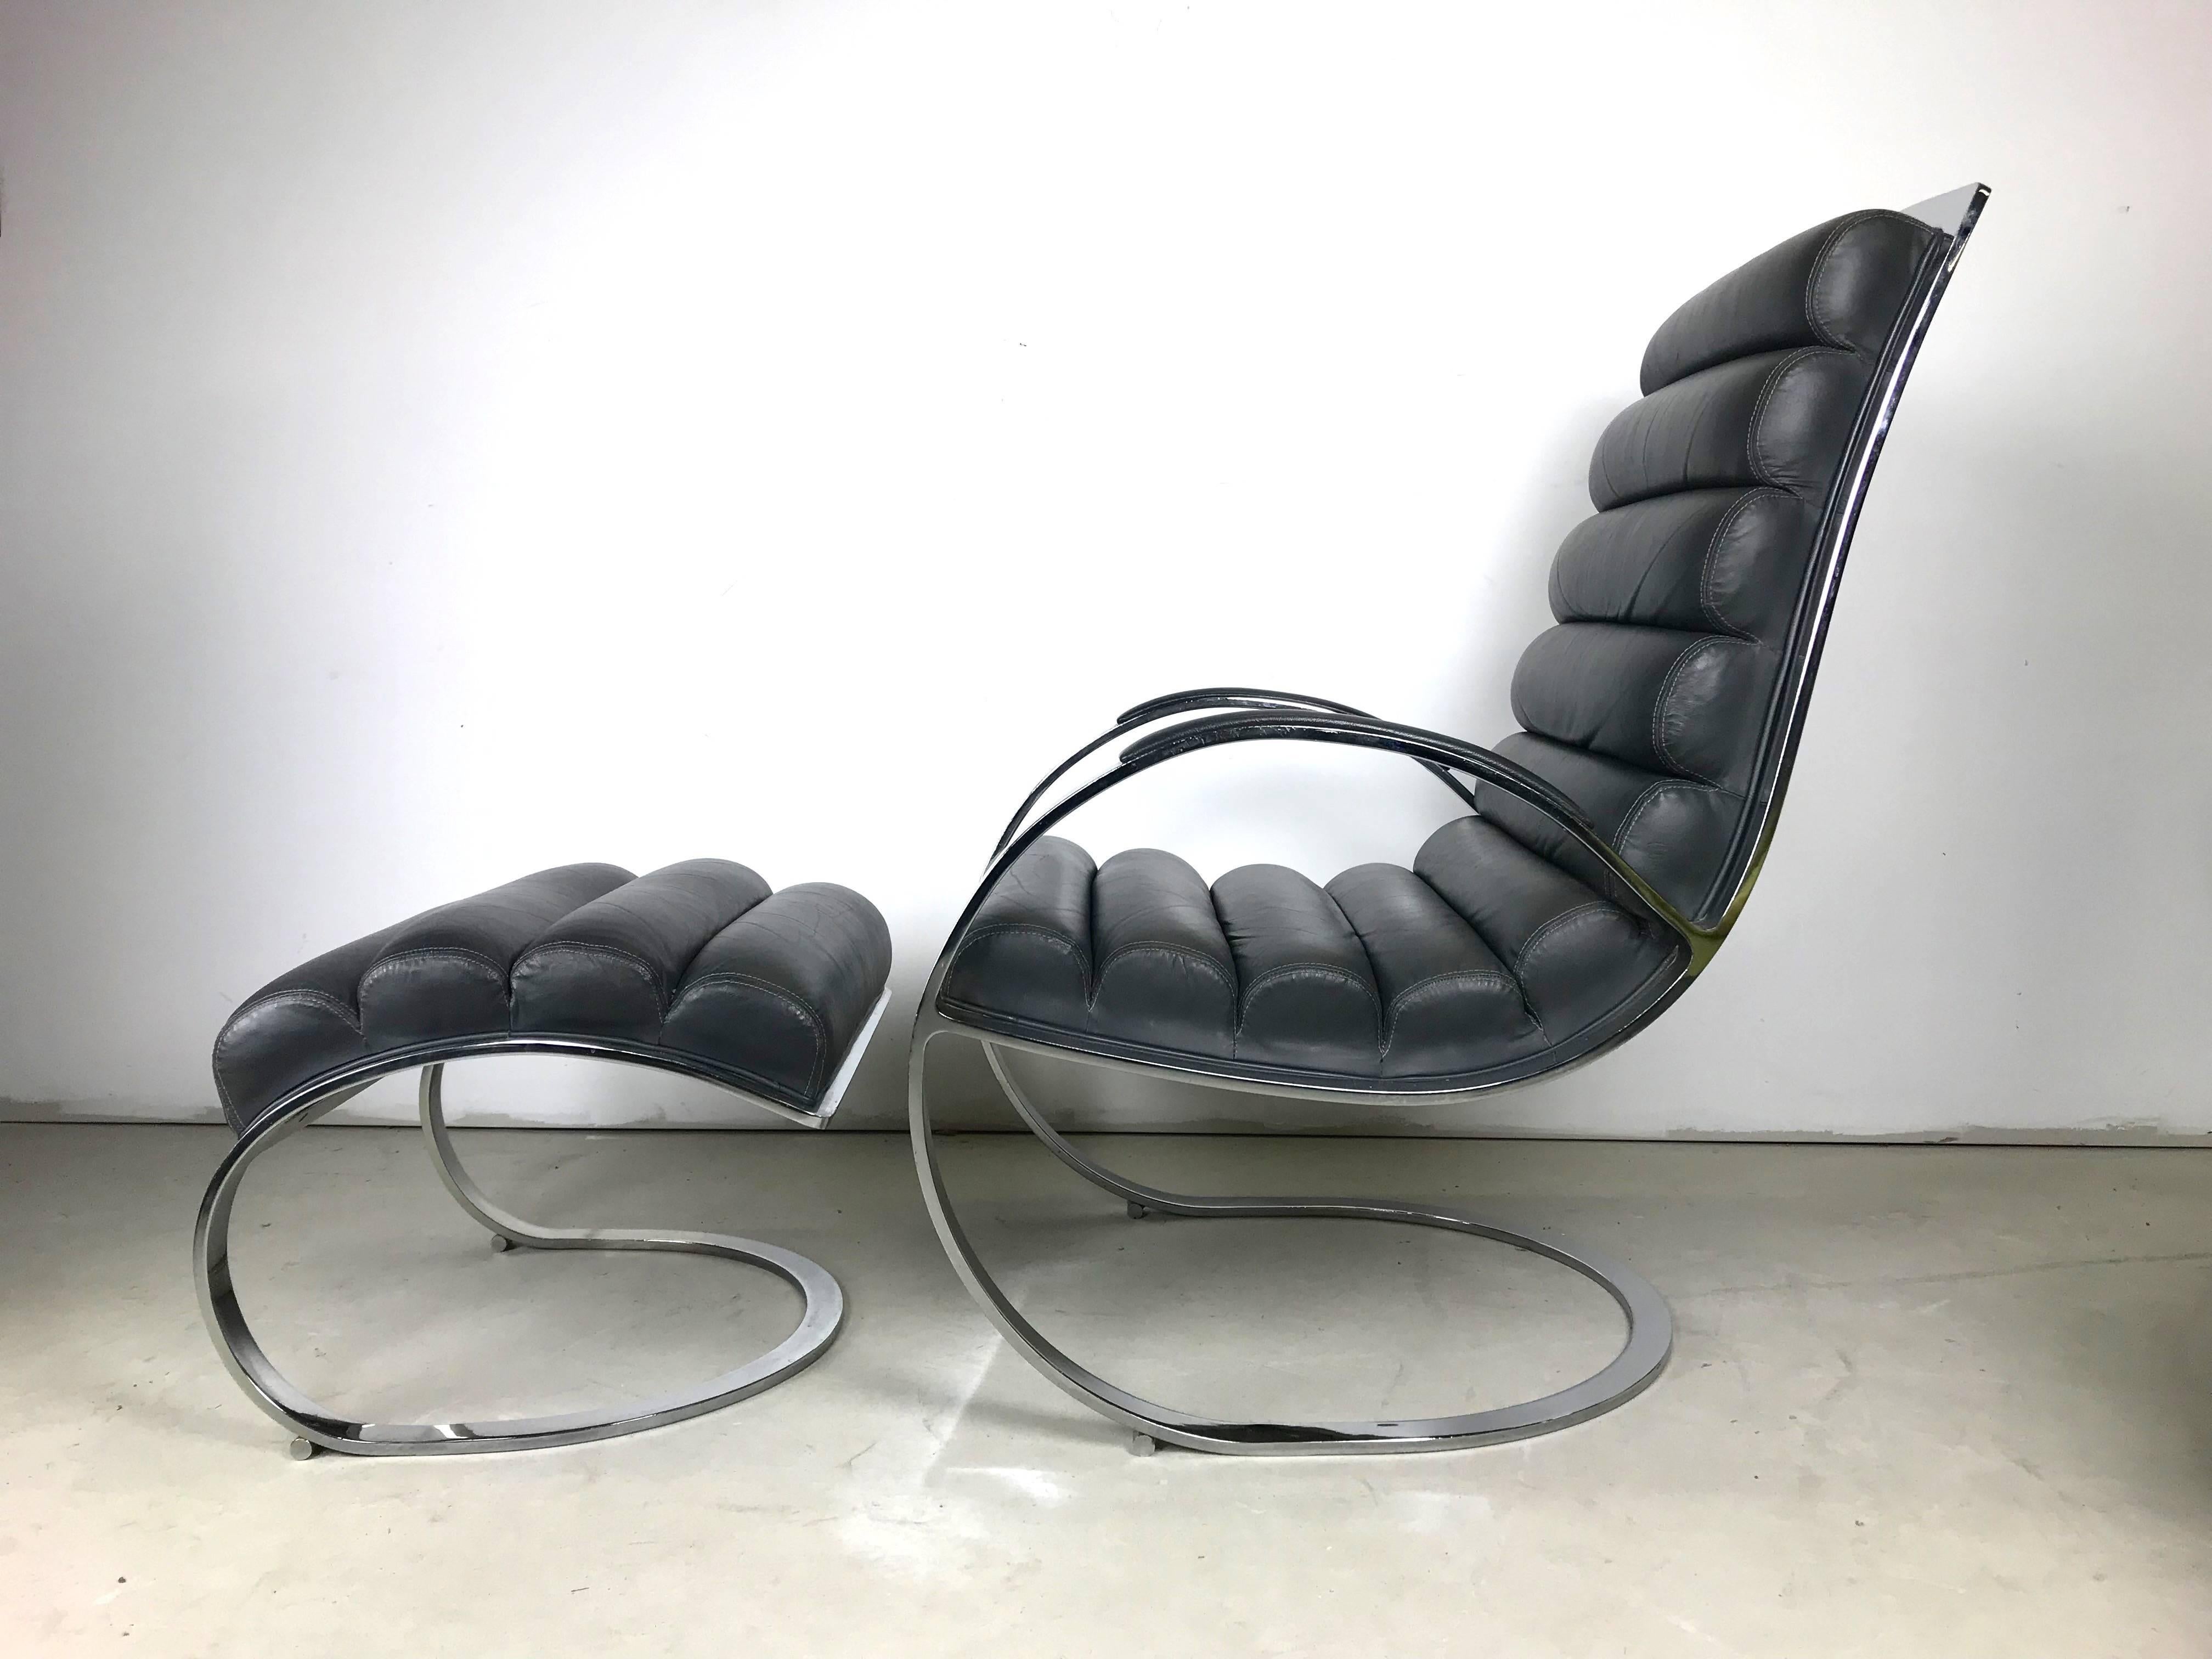 This is a fine tufted leather and heavy chromed steel lounge chair and ottoman designed by Milo Baughman in the 1970s the leather is charcoal grey and is in very nice condition, supple with just the right amount of give. The chromed frame is very